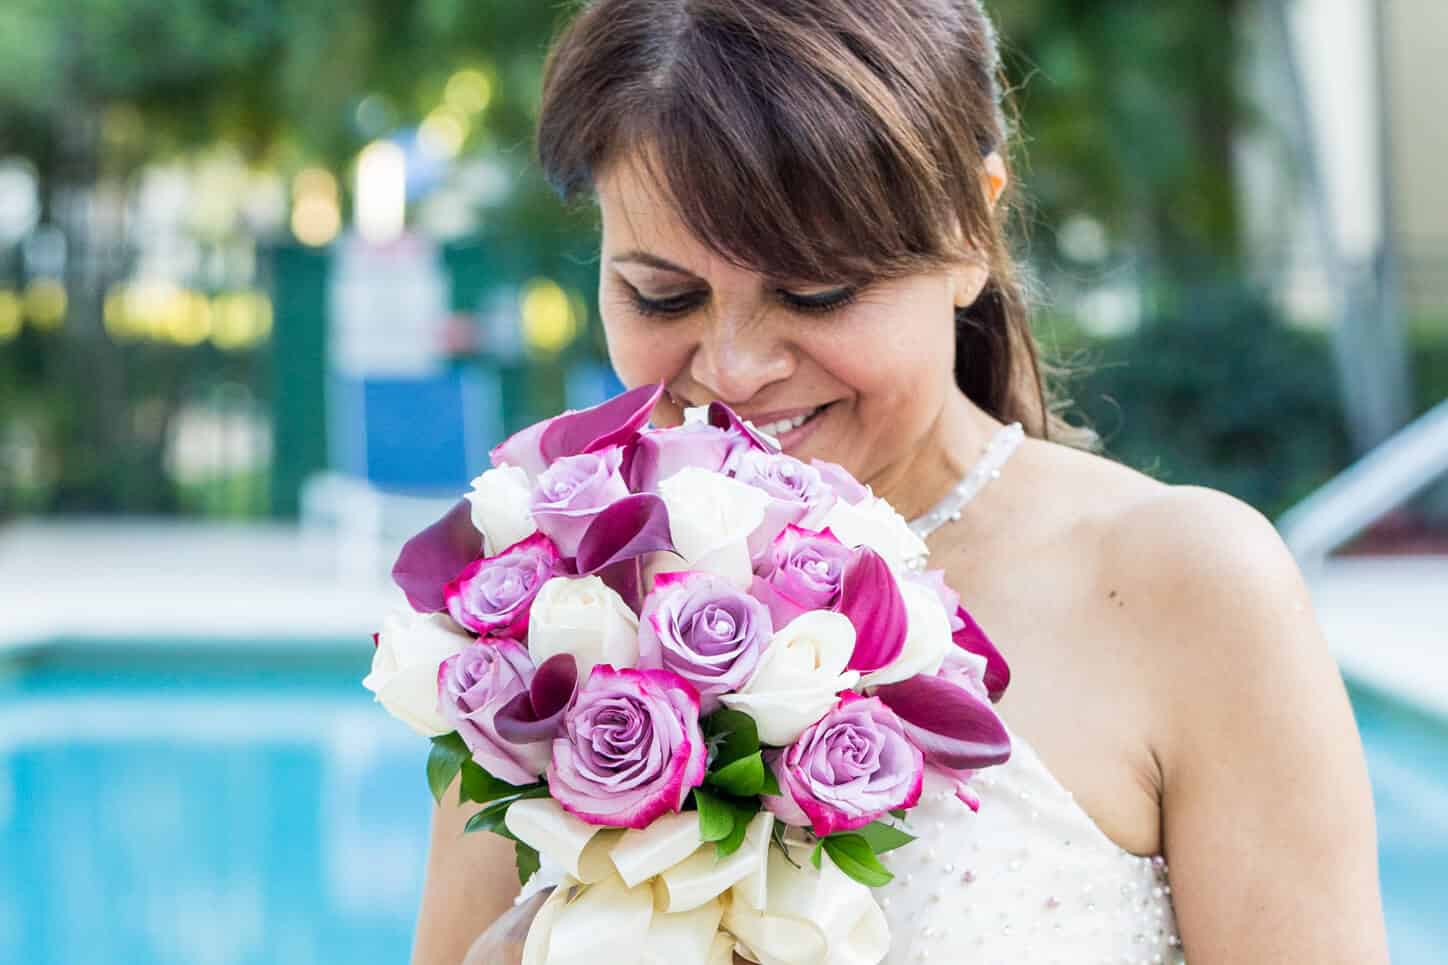 Featured photo of bride holding floral bouquet | By wedding vendor White House Wedding Photography